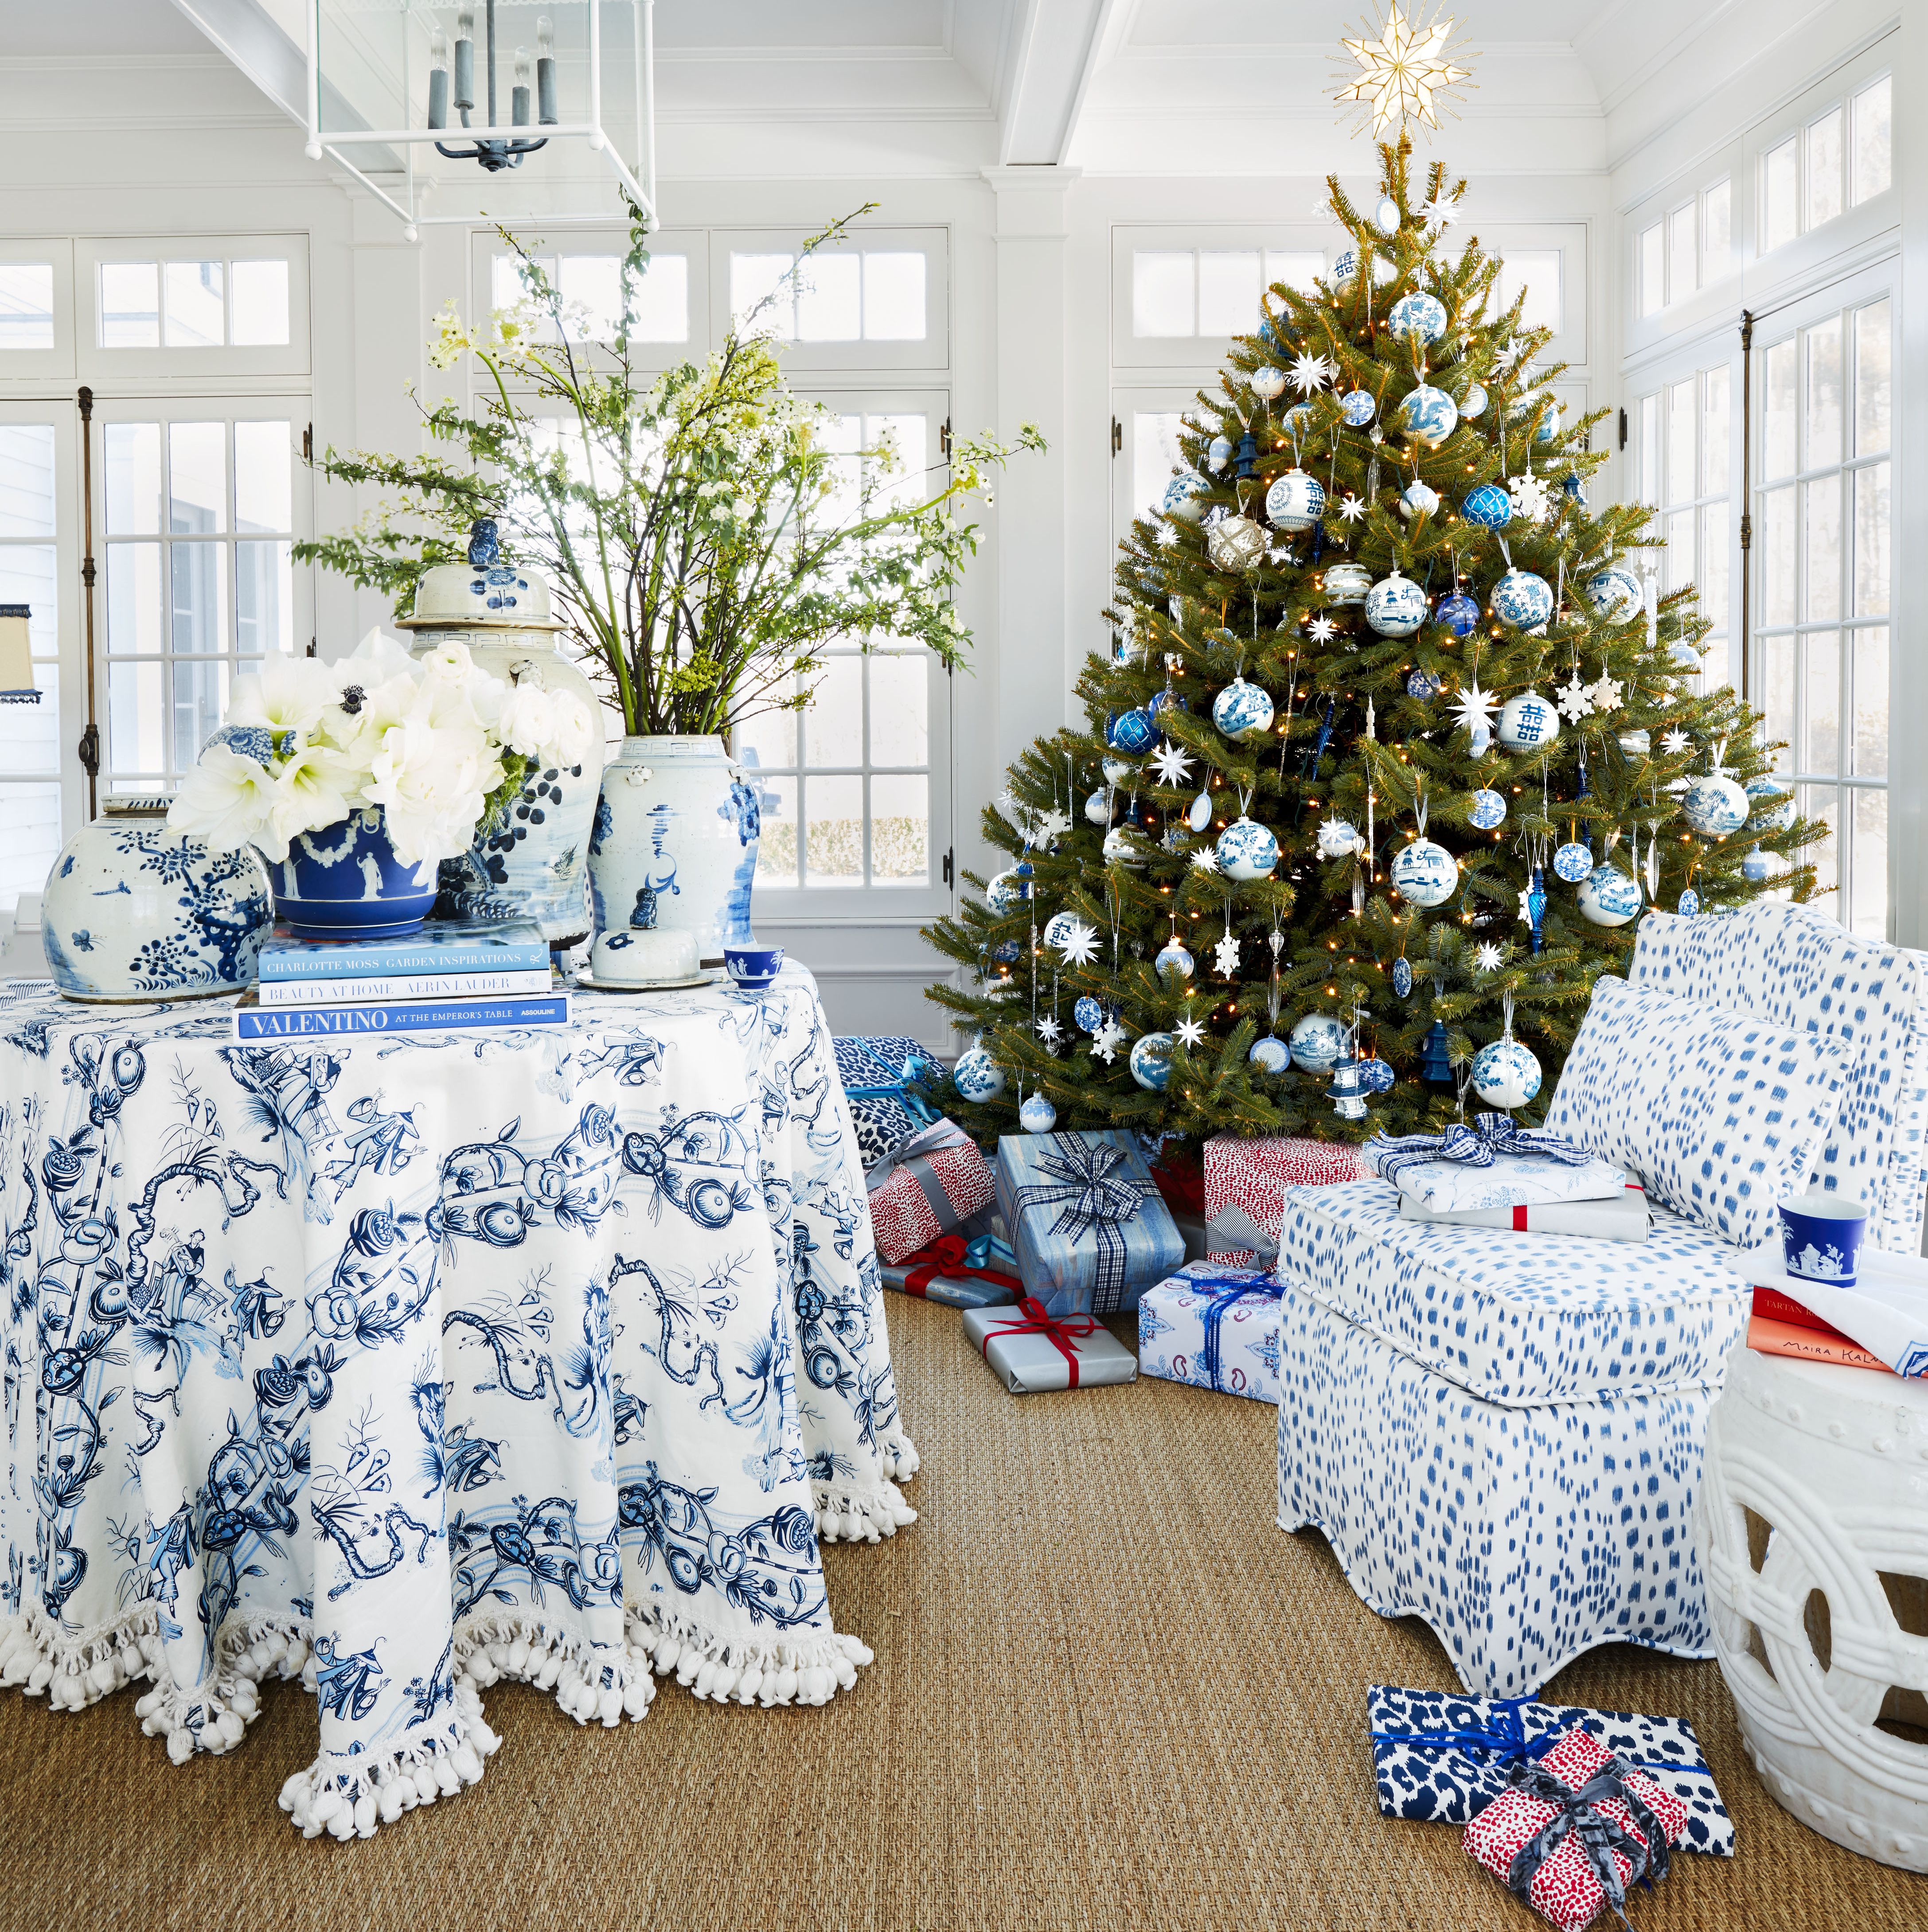 What House Beautiful Editors Are Asking for This Holiday Season